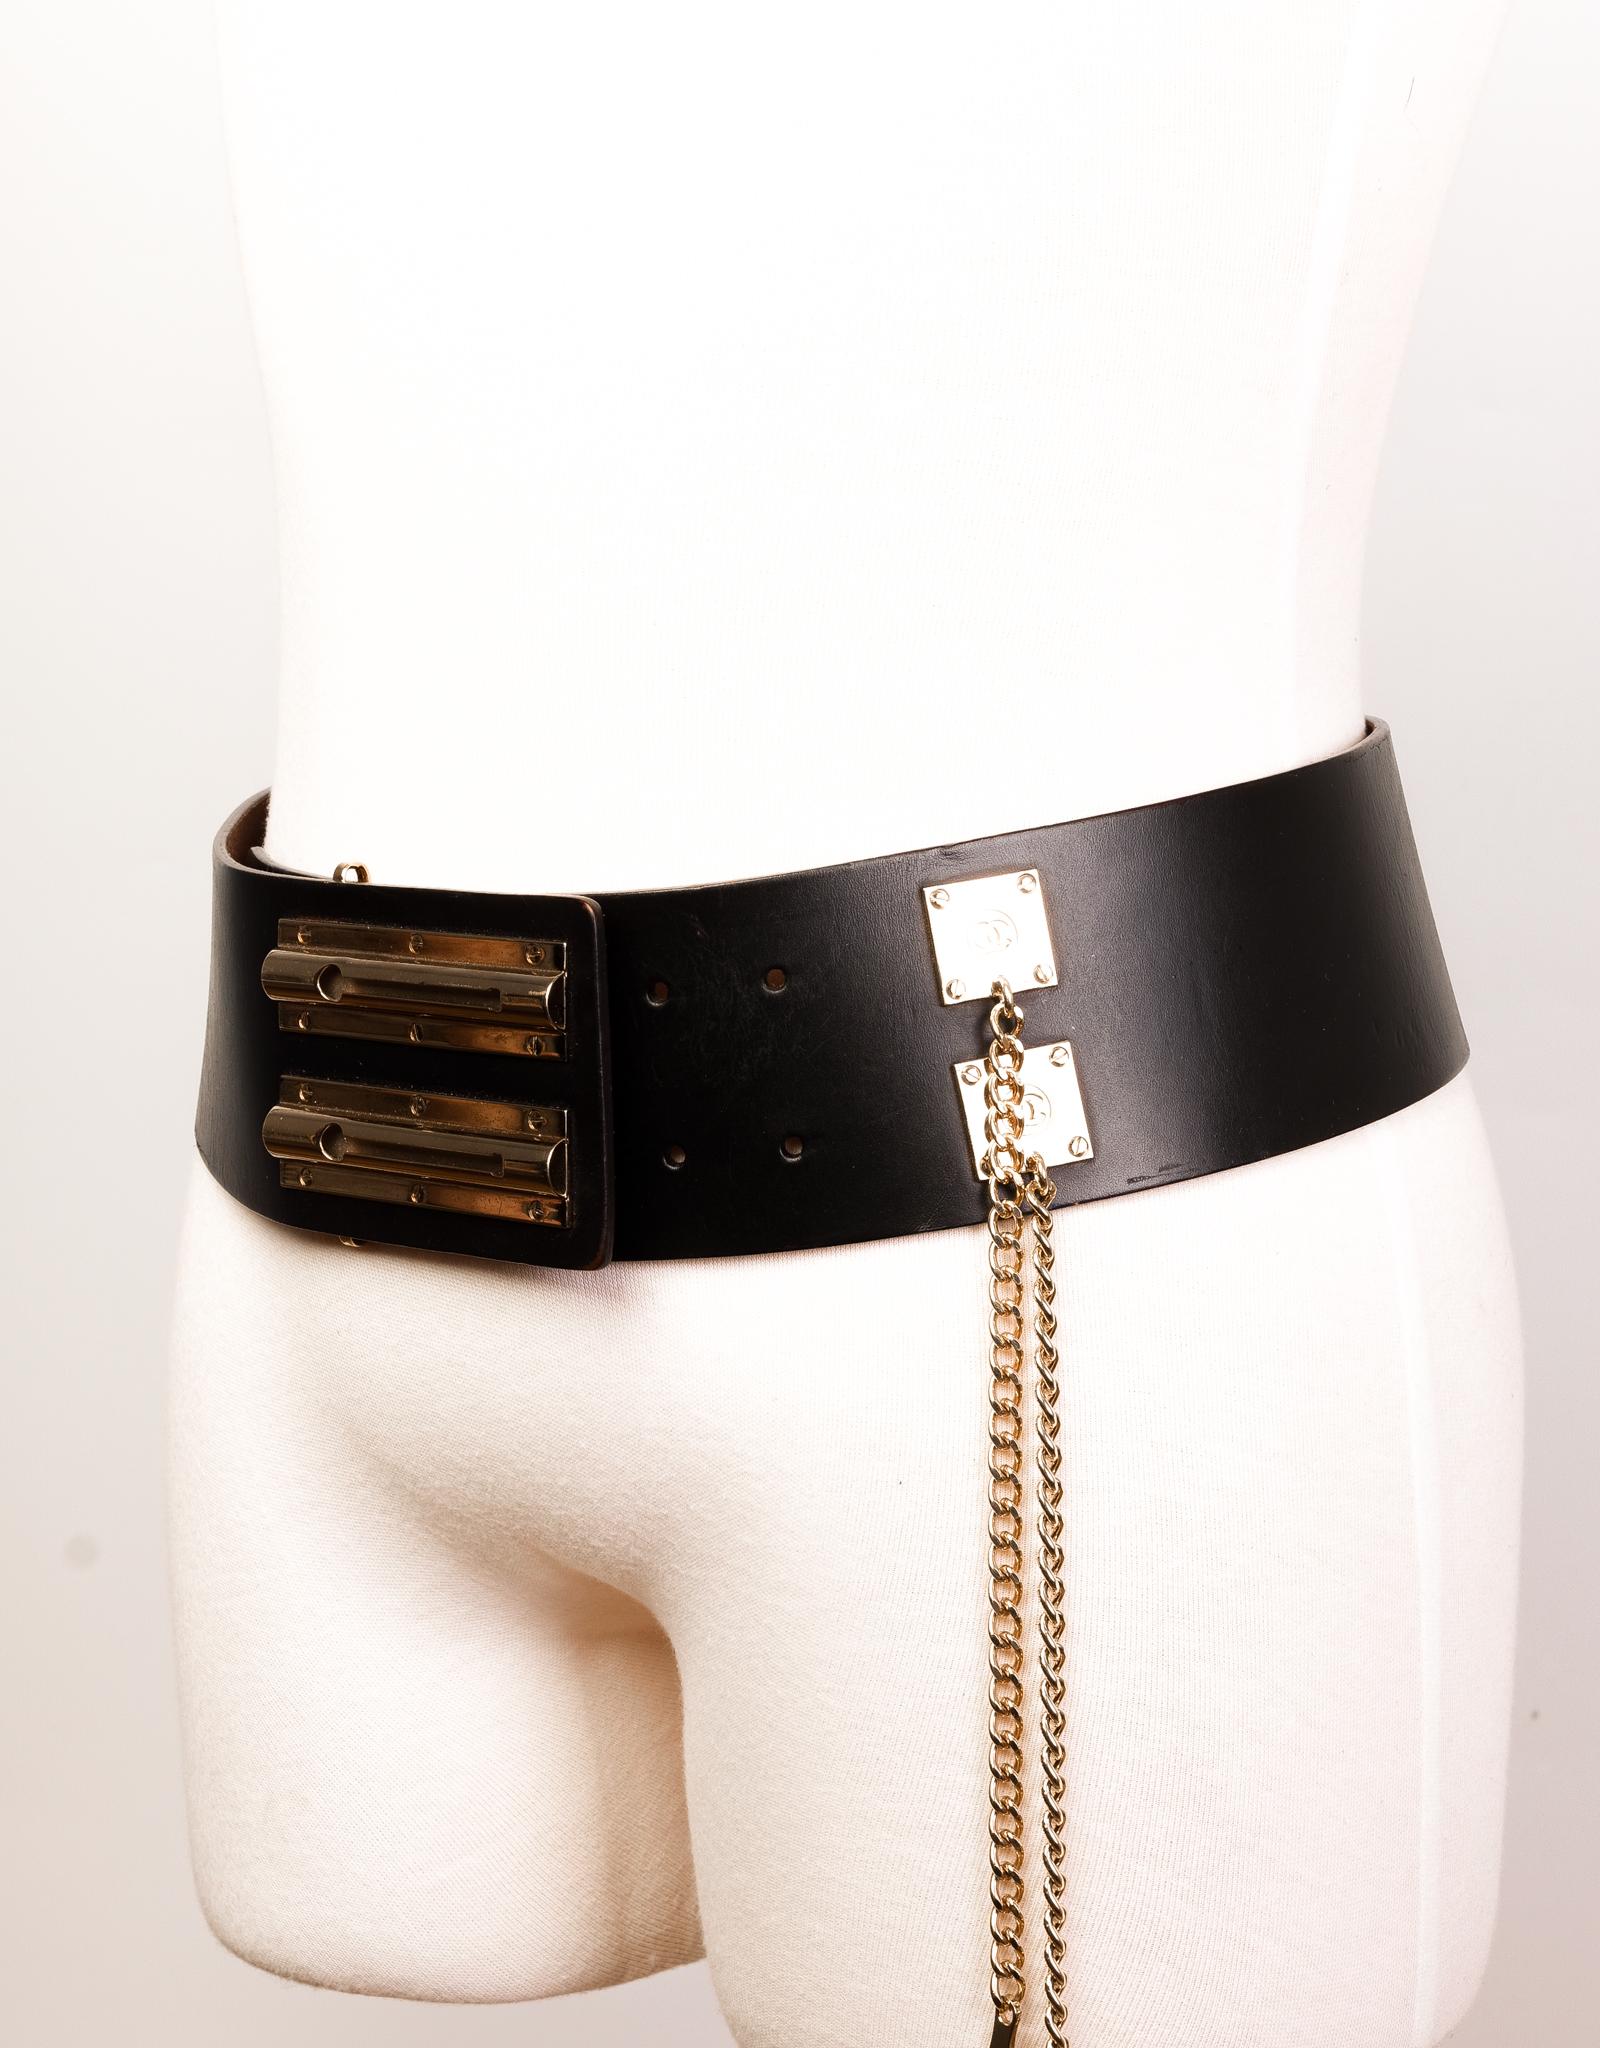 This Chanel Maxi belt is made with black leather and features a double sliding lock closure with gold-tone hardware.

COLOR: Black
MATERIAL: Leather
ITEM CODE: 02P
MEASURES: L 40” x W 3”
SIZE: 90/36
COMES WITH: Dust bag
CONDITION: Very good - belt